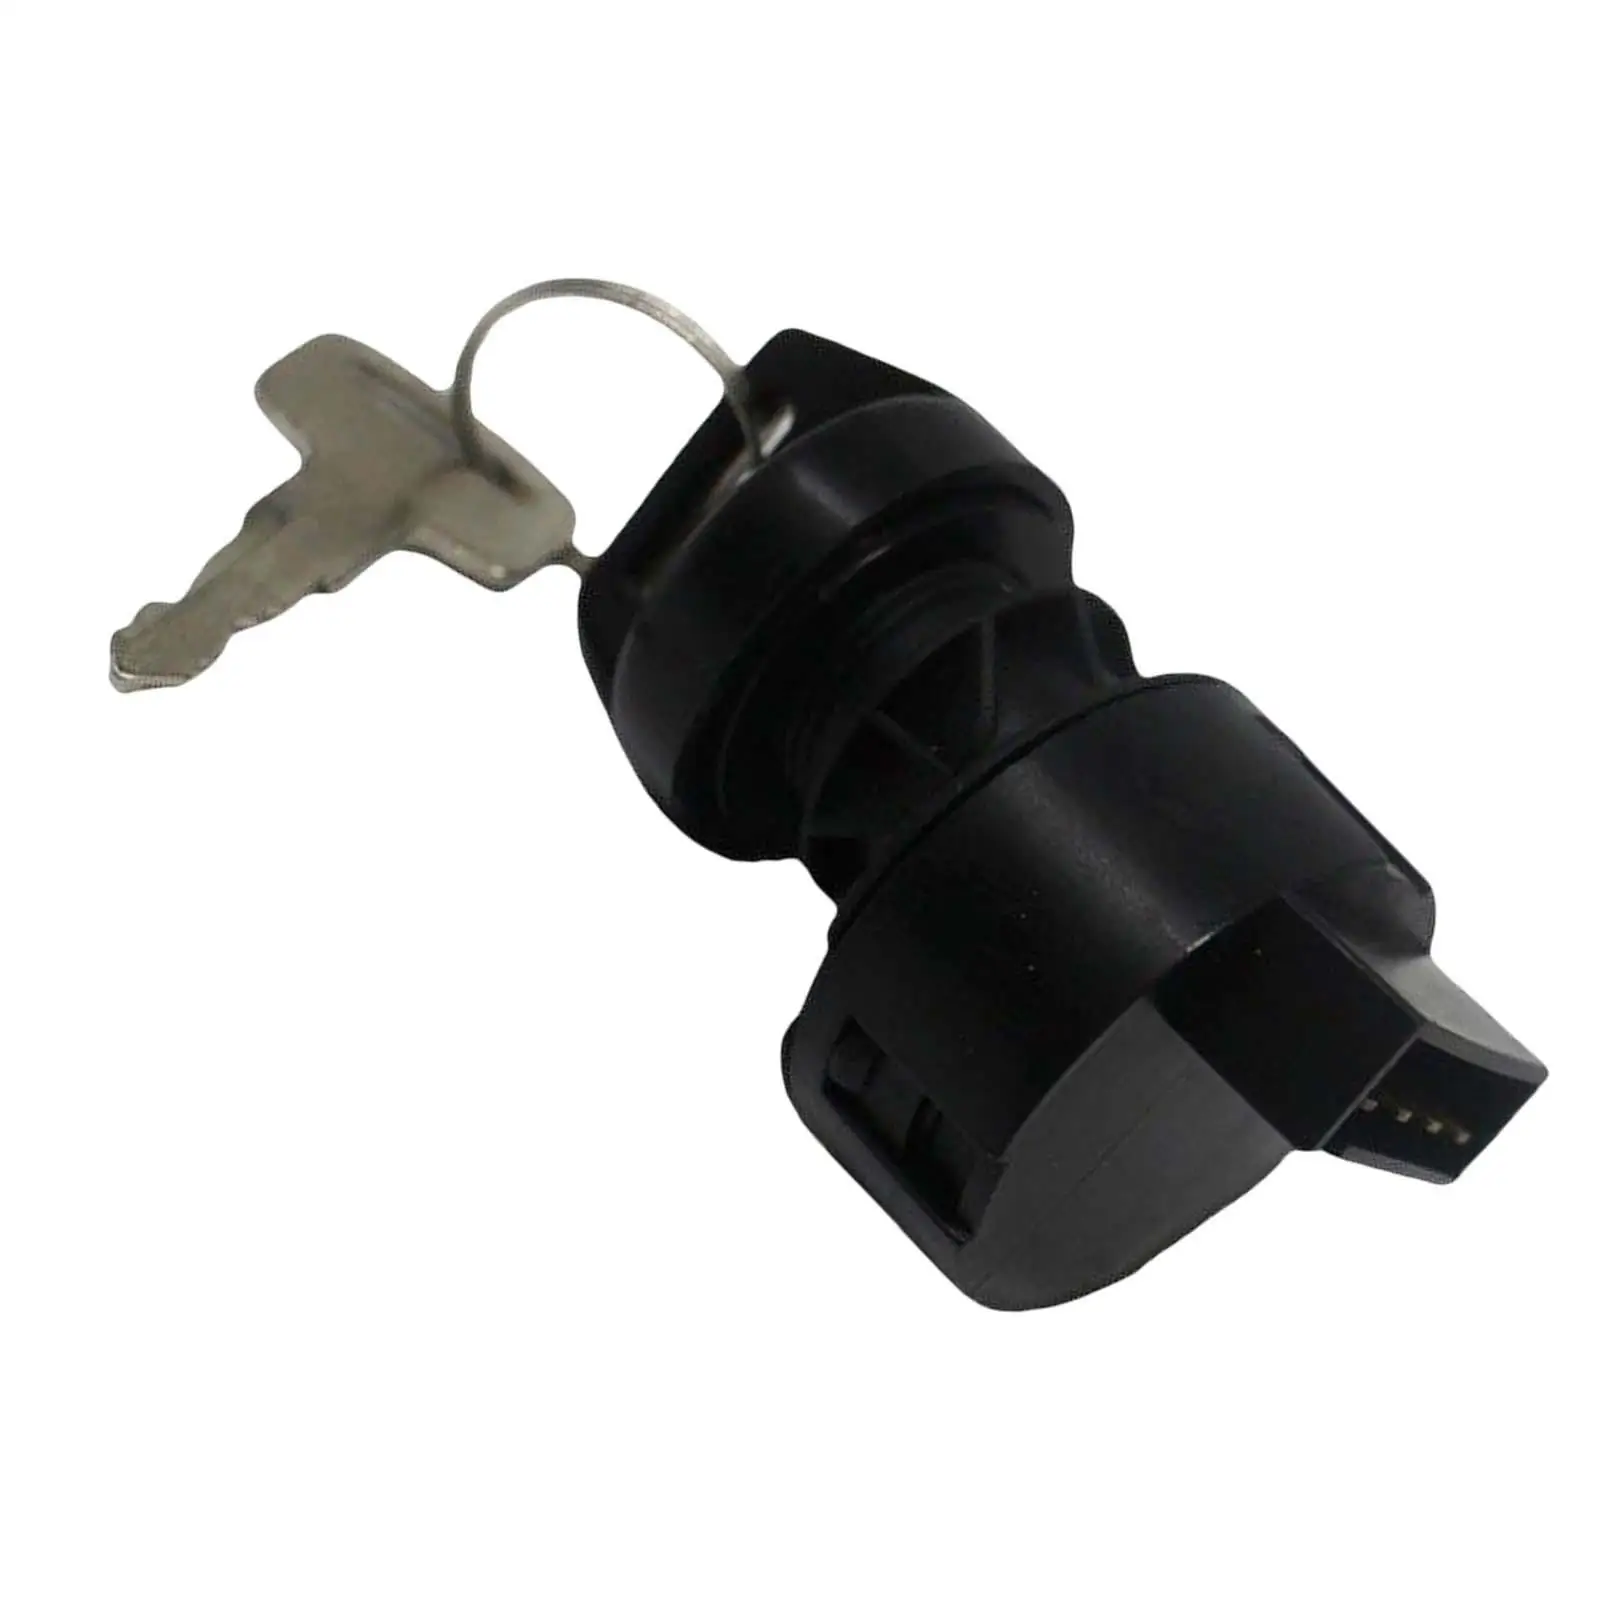 Ignition Switch Lock Spare Parts Accessory Black for Polaris Sportsman